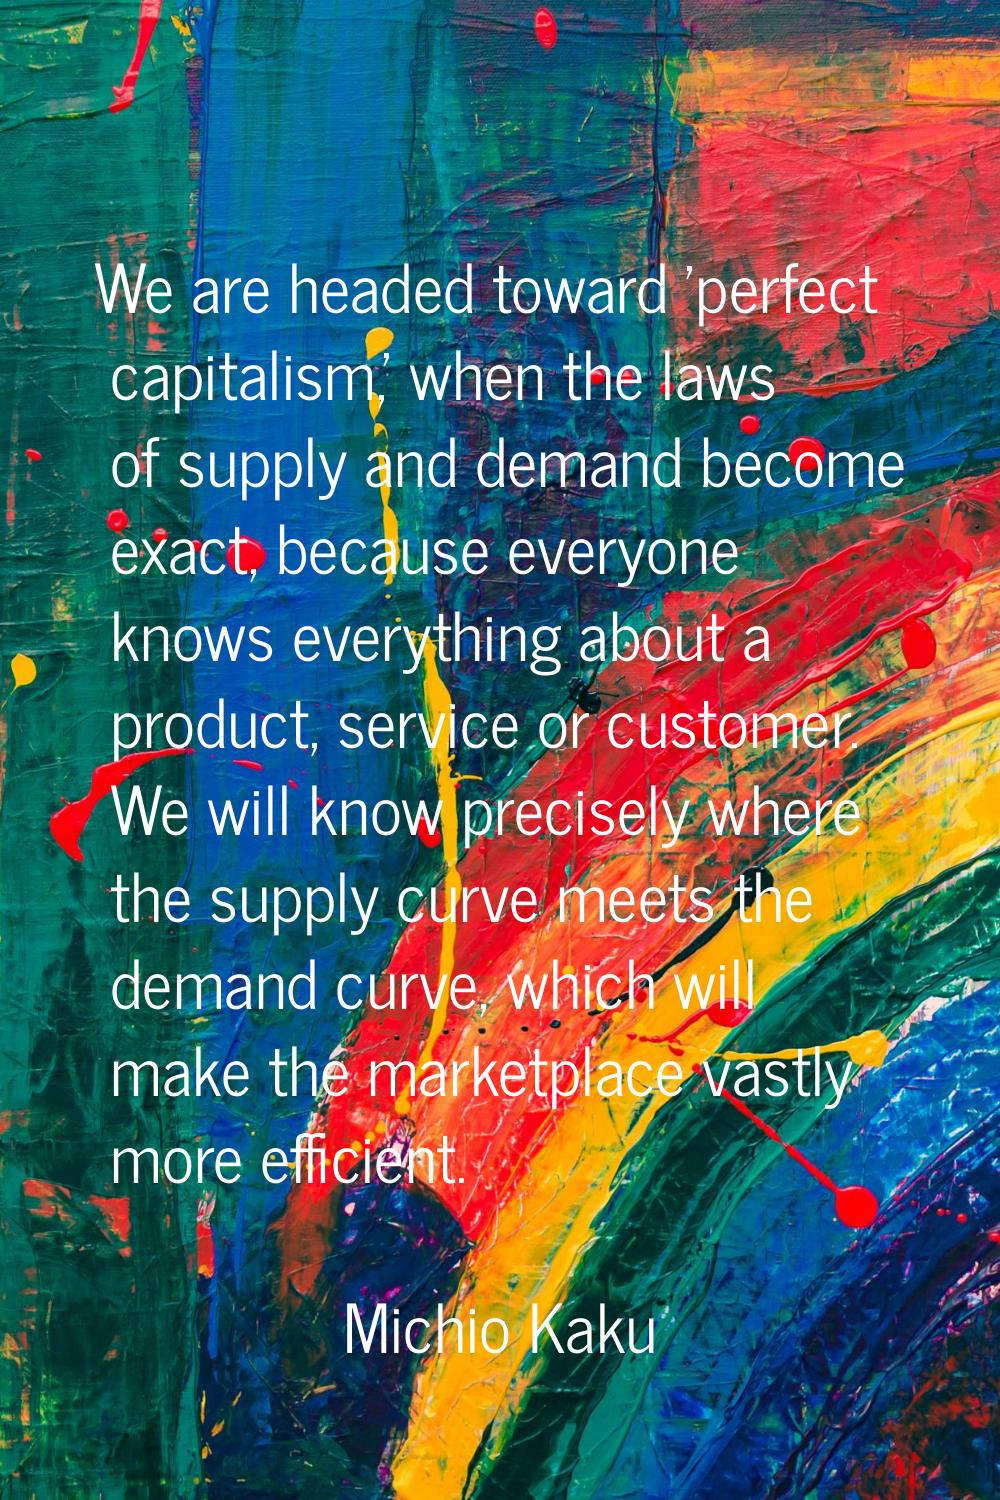 We are headed toward 'perfect capitalism,' when the laws of supply and demand become exact, because